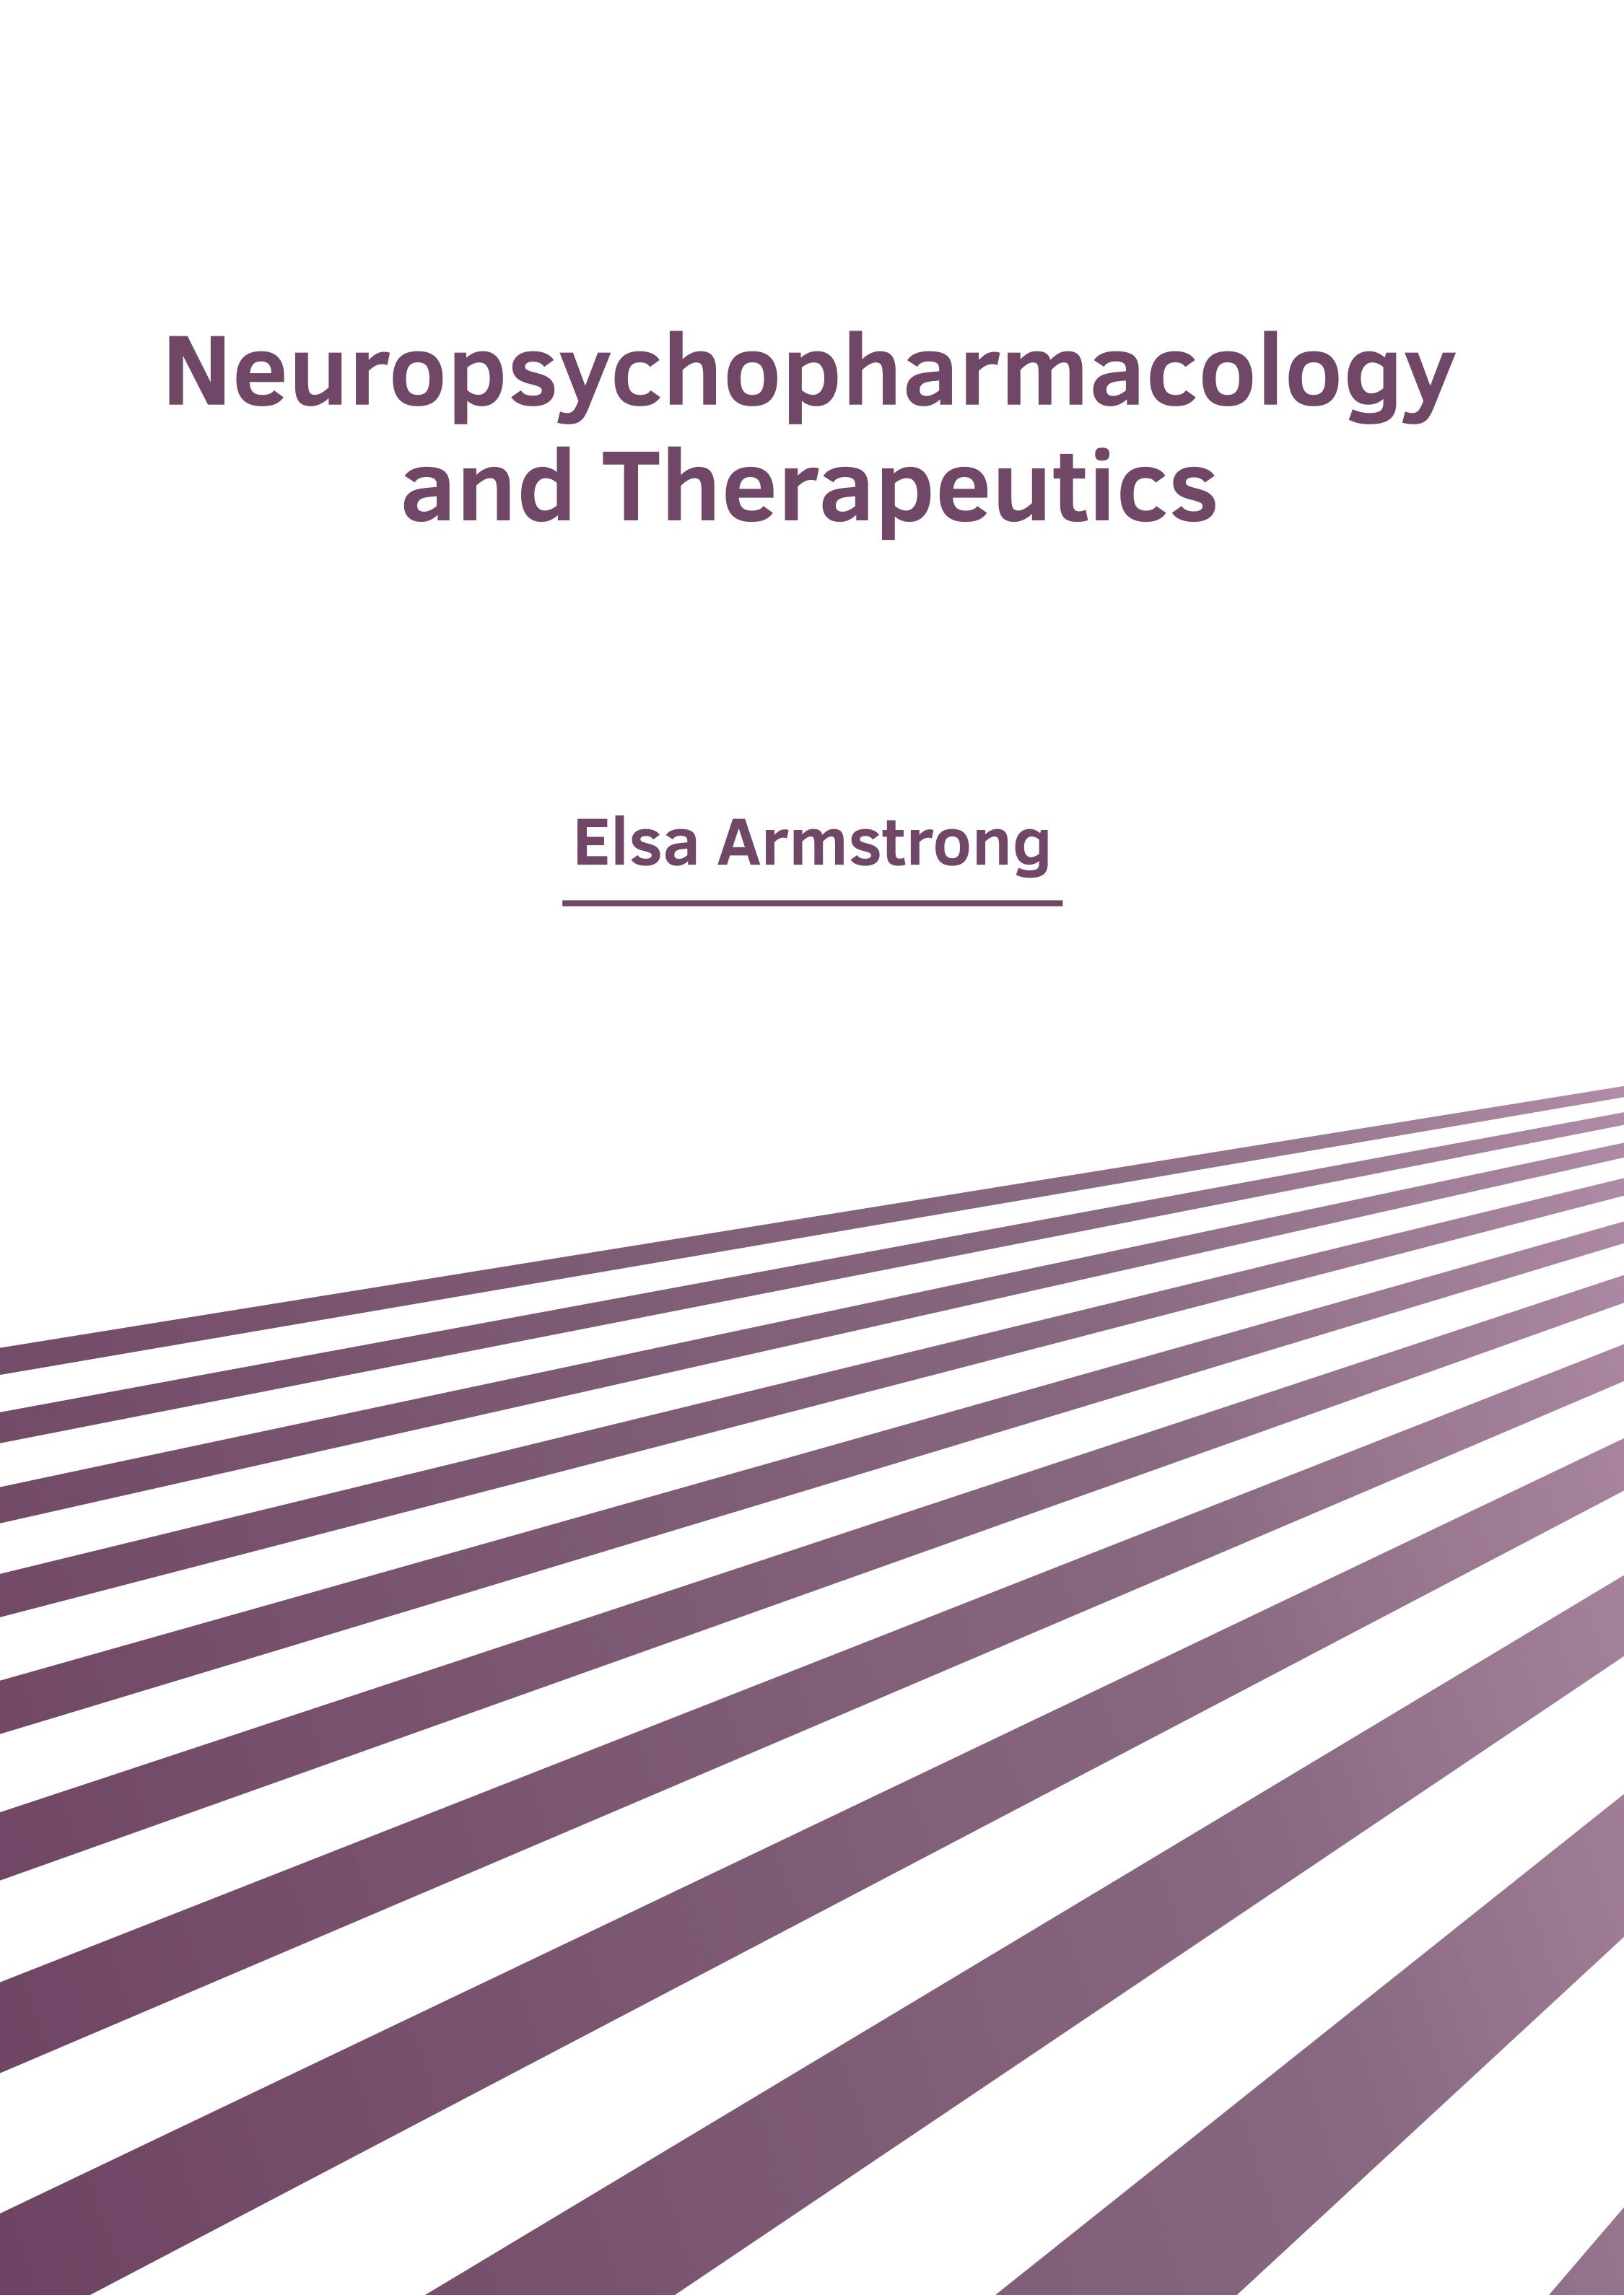 exclusive-publishers/american-medical-publishers/neuropsychopharmacology-and-therapeutics-9798887403199